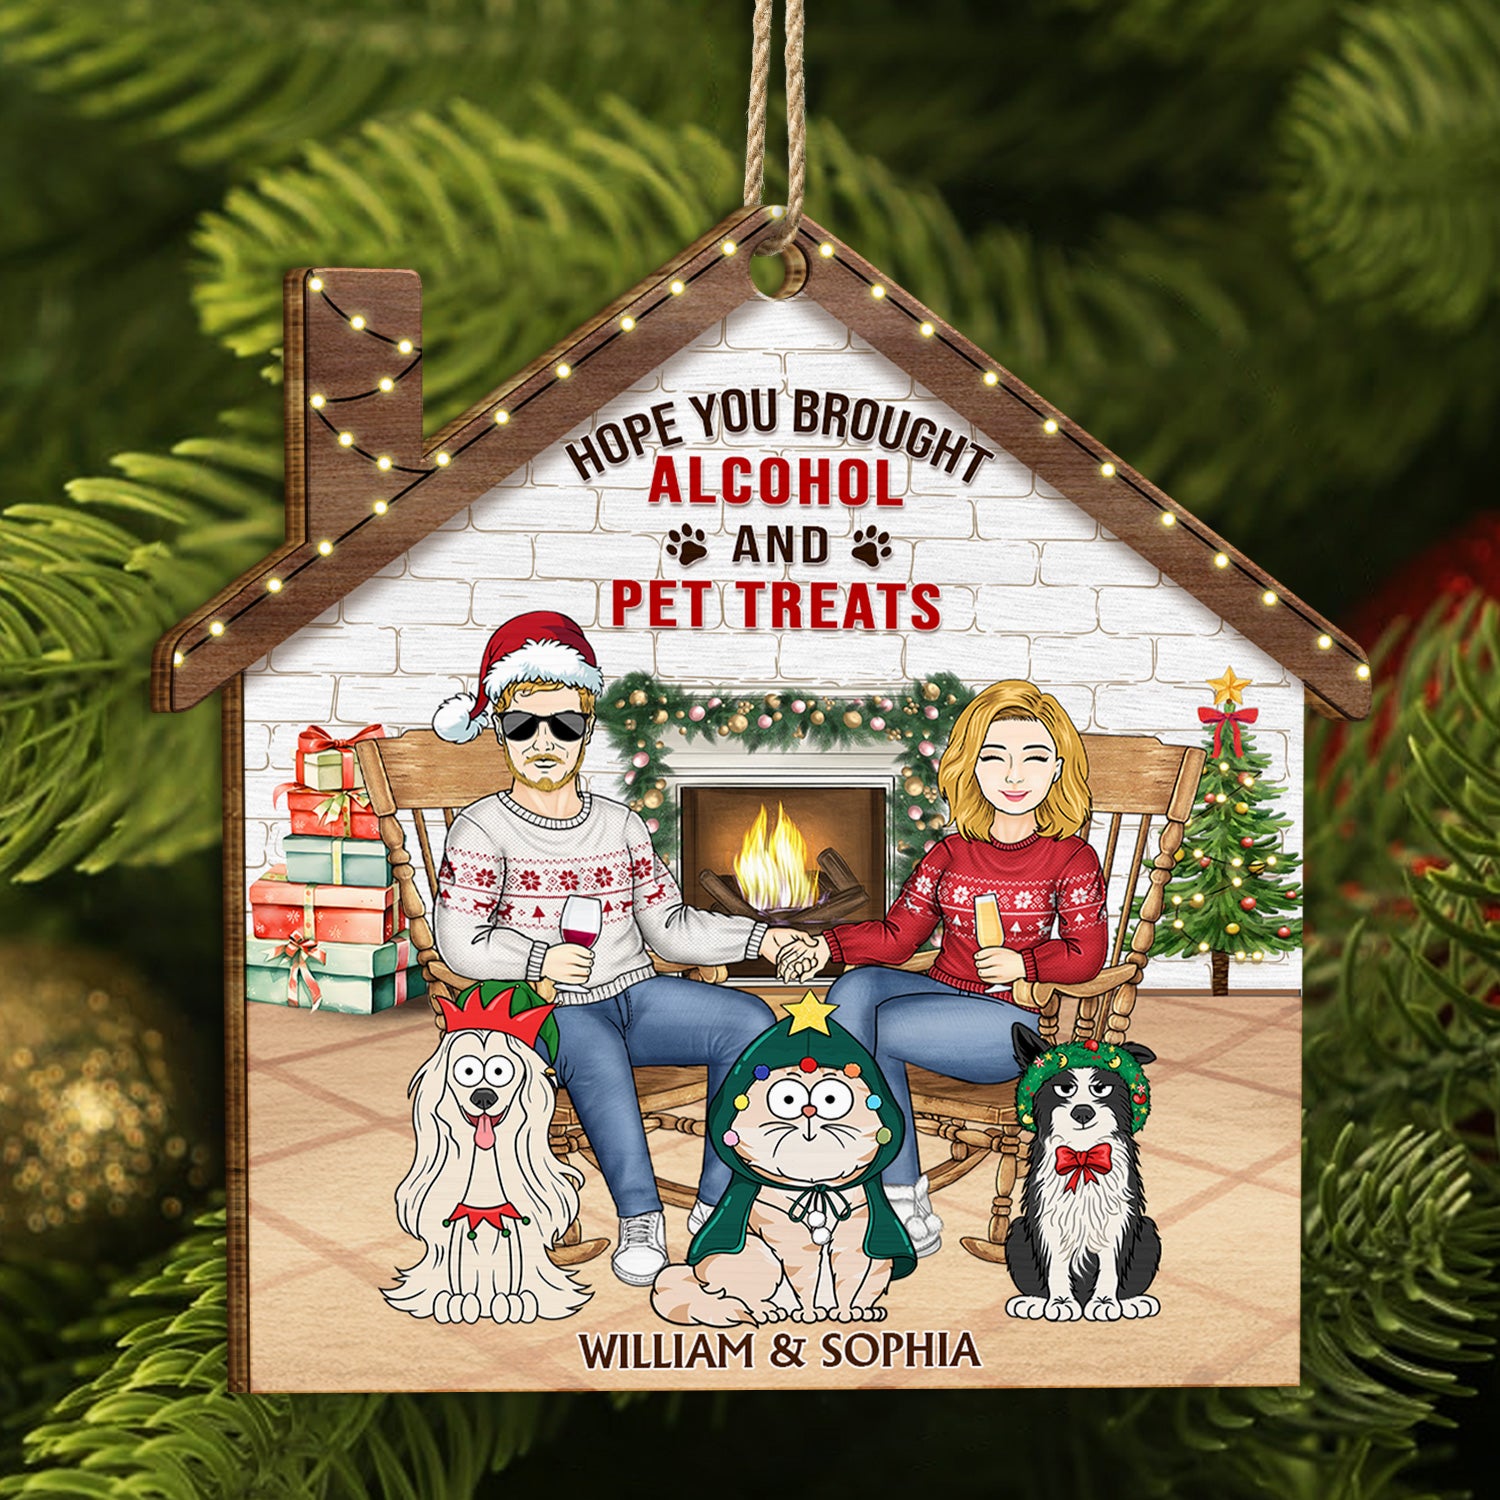 Hope You Brought Alcohol And Dog Cat Treats - Christmas Gift For Couple, Pet Lovers And Family - Personalized Custom Shaped Wooden Ornament